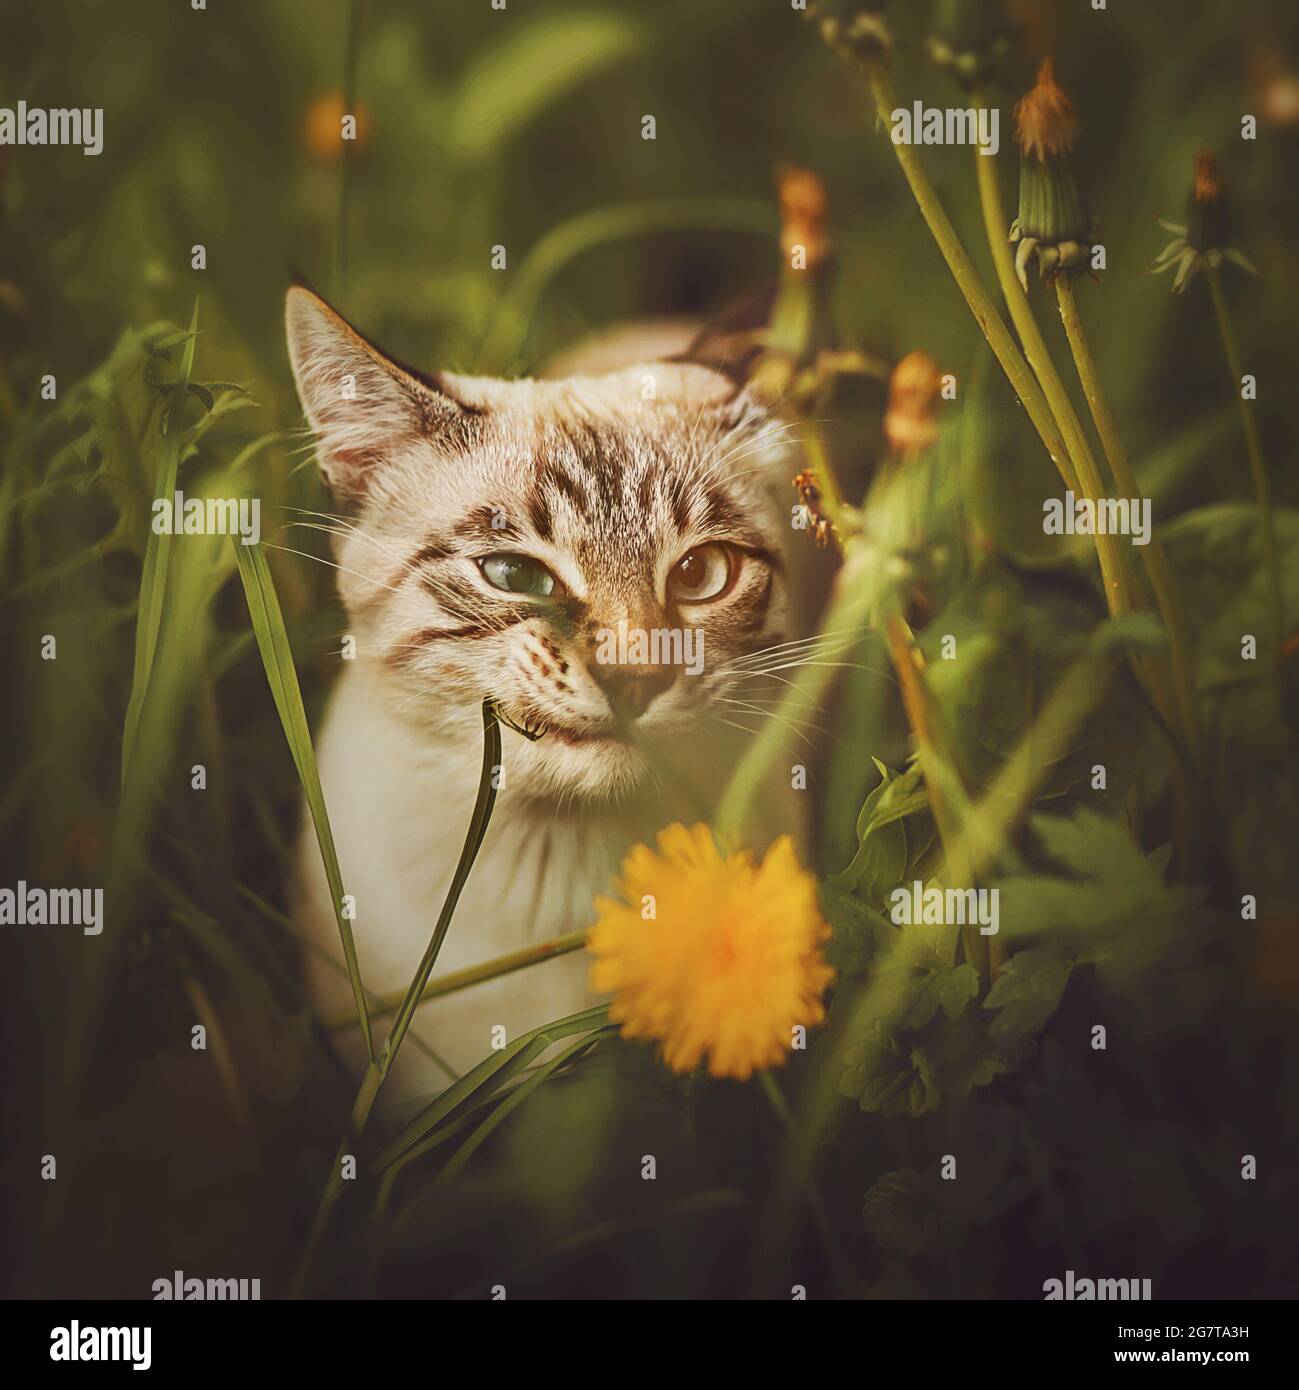 Cute crazy funny Thai kitten is sitting among the grass and wildflowers on a summer day and biting a blade of grass. Summer and pets. Stock Photo